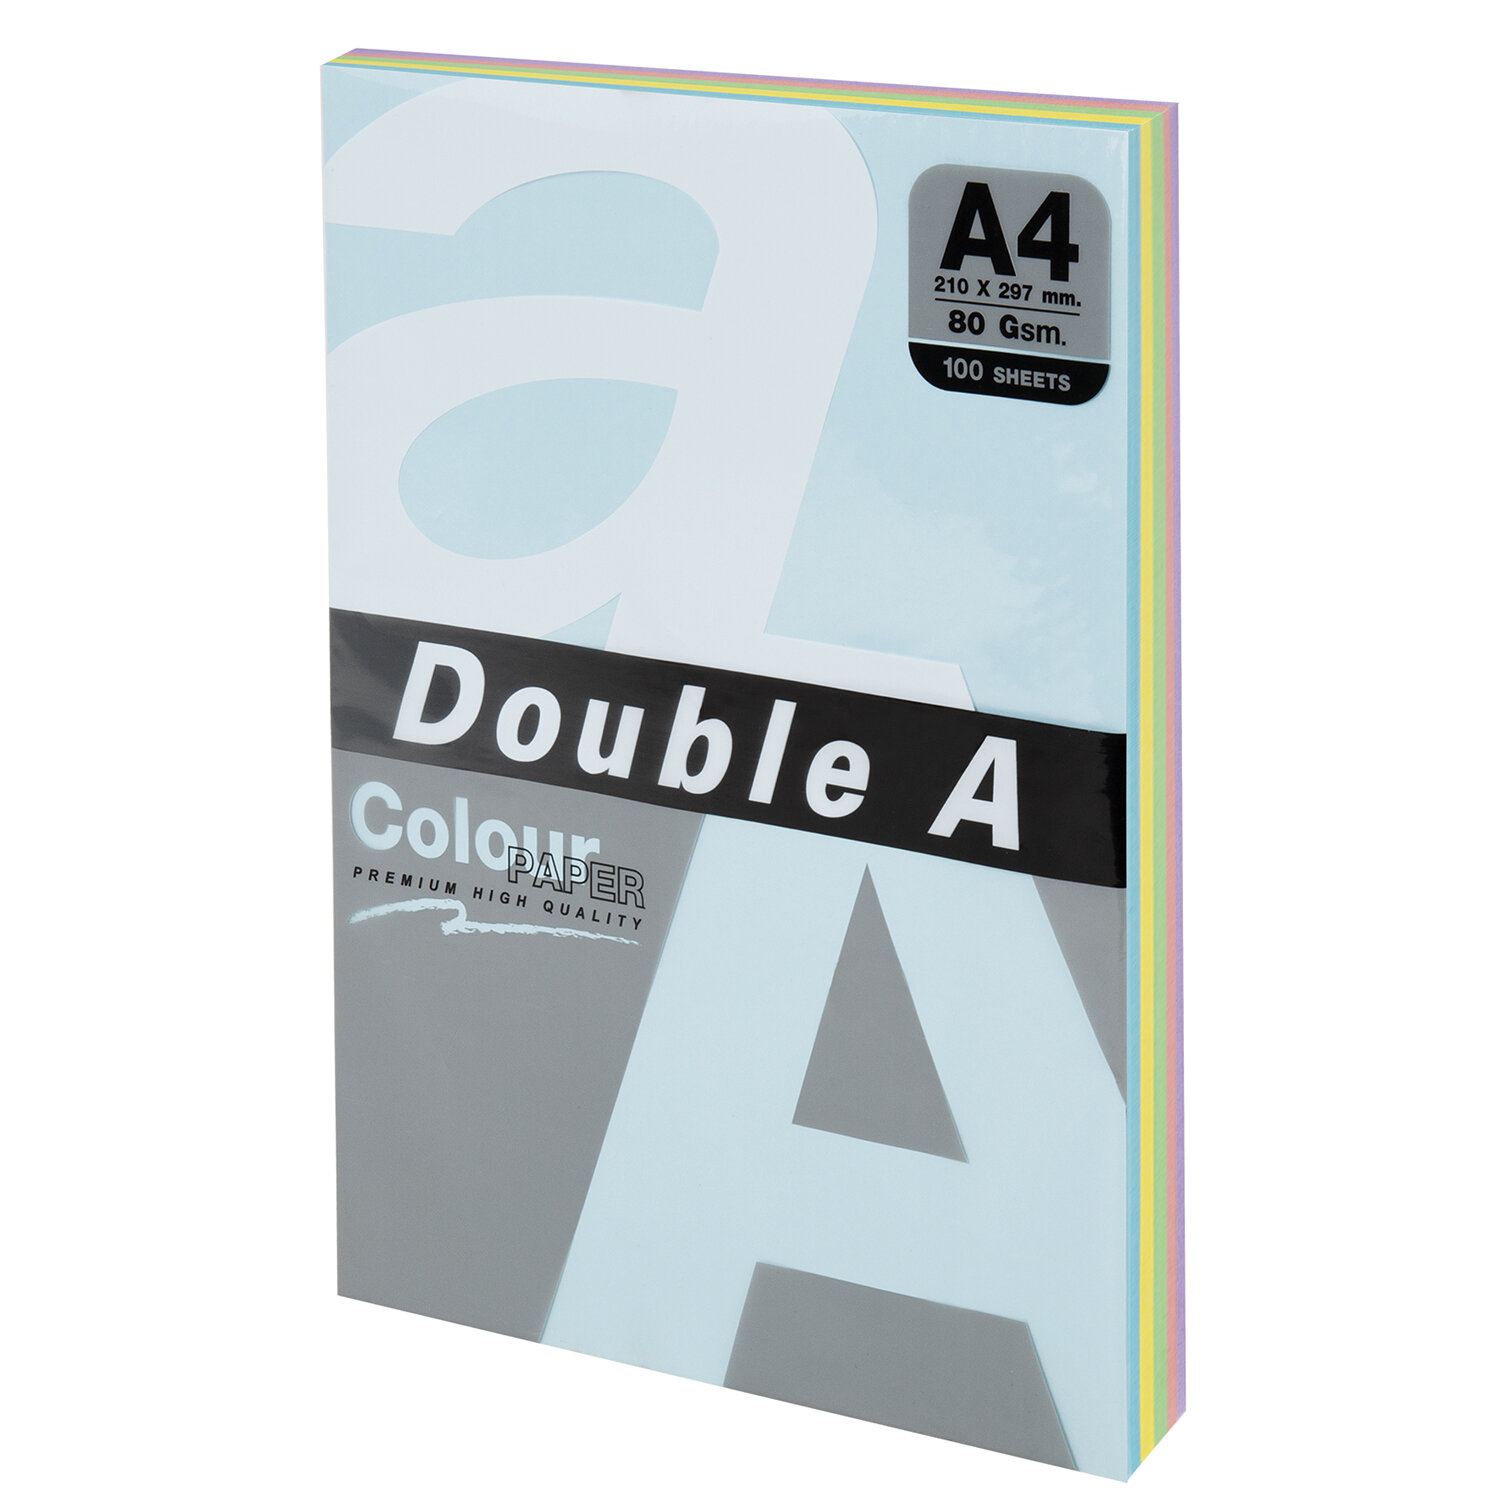  DOUBLE A 4, 80 /2, 100 .,  